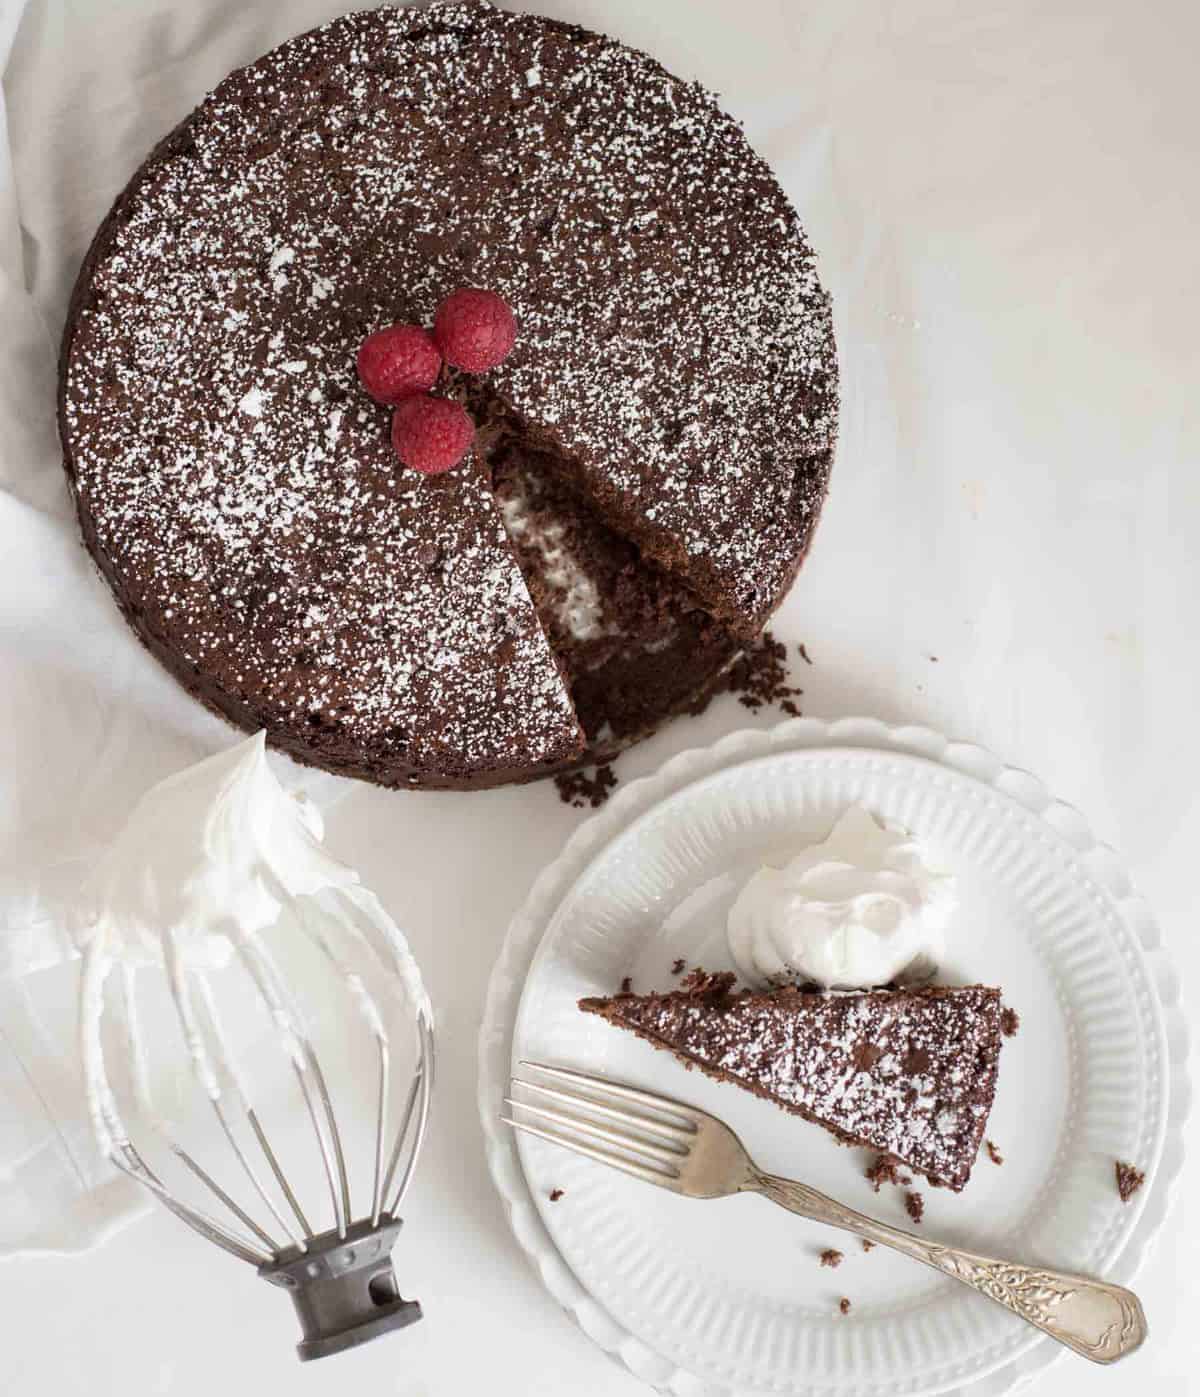 Light and fluffy flourless chocolate torte recipe made from just three simple ingredients. You won't believe how delicious this flourless chocolate torte is.